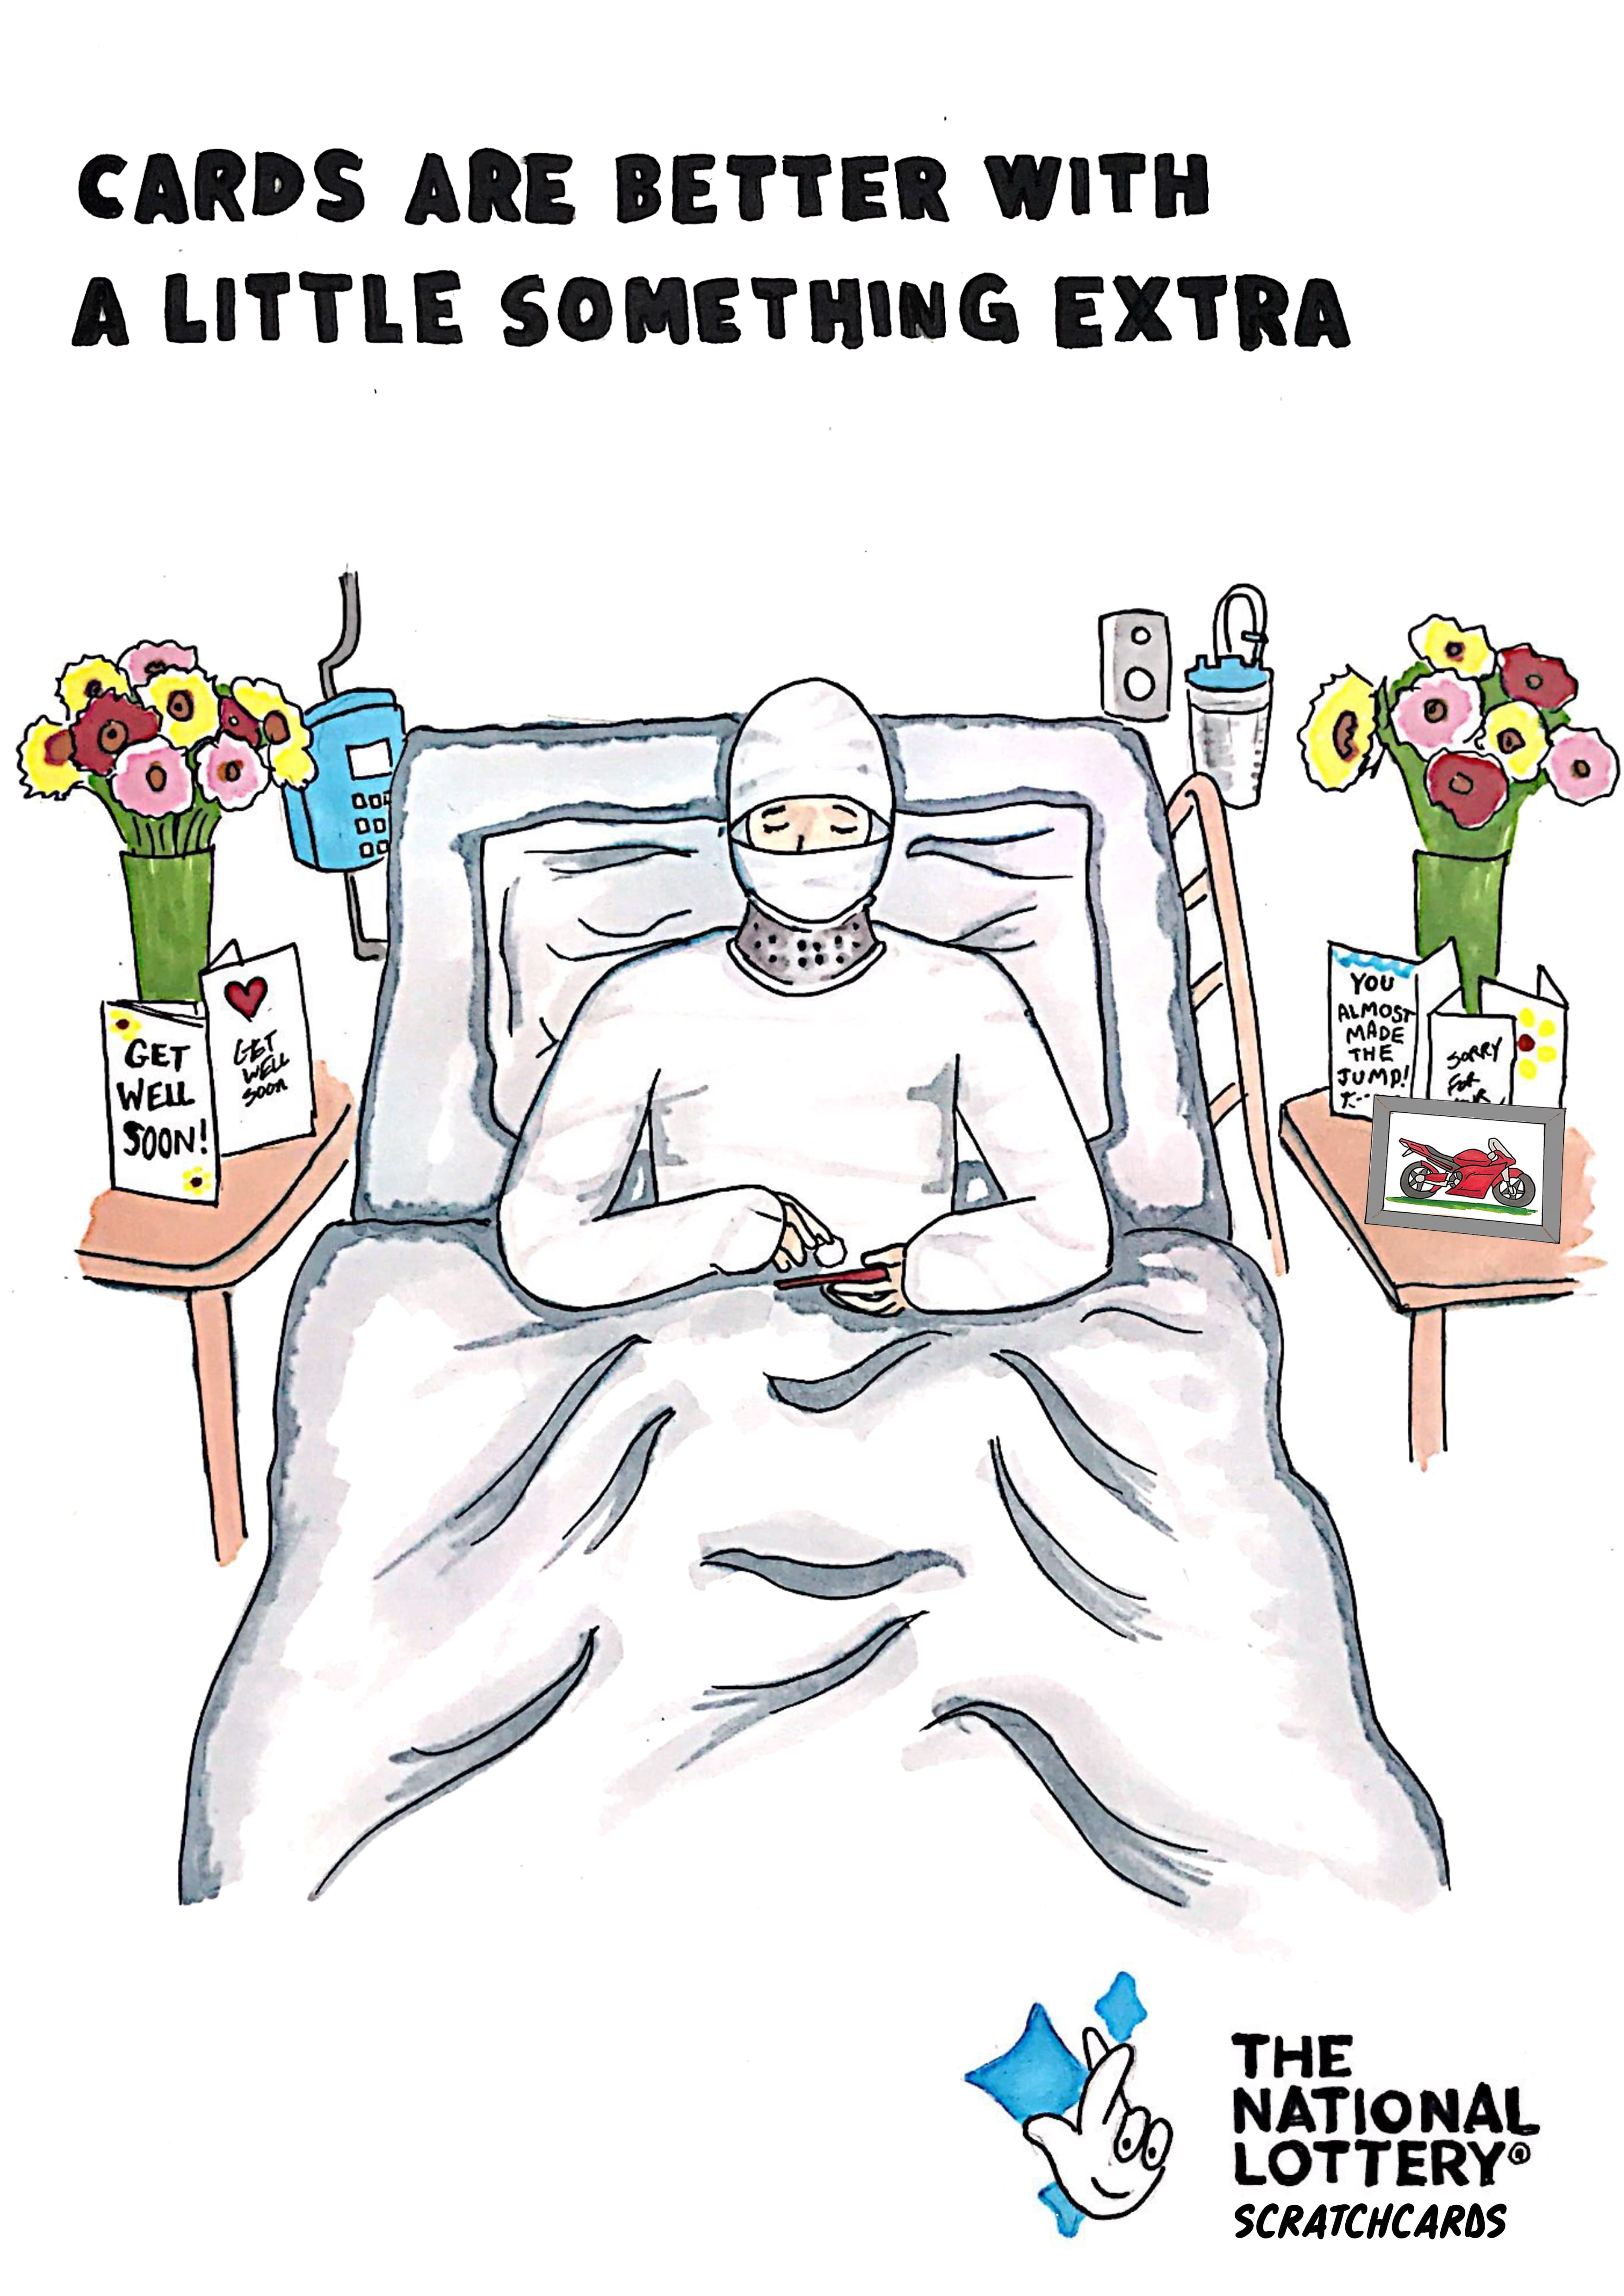 Illustration of person in hospital scratching a scratchcard surrounded with 'get well soon' cards